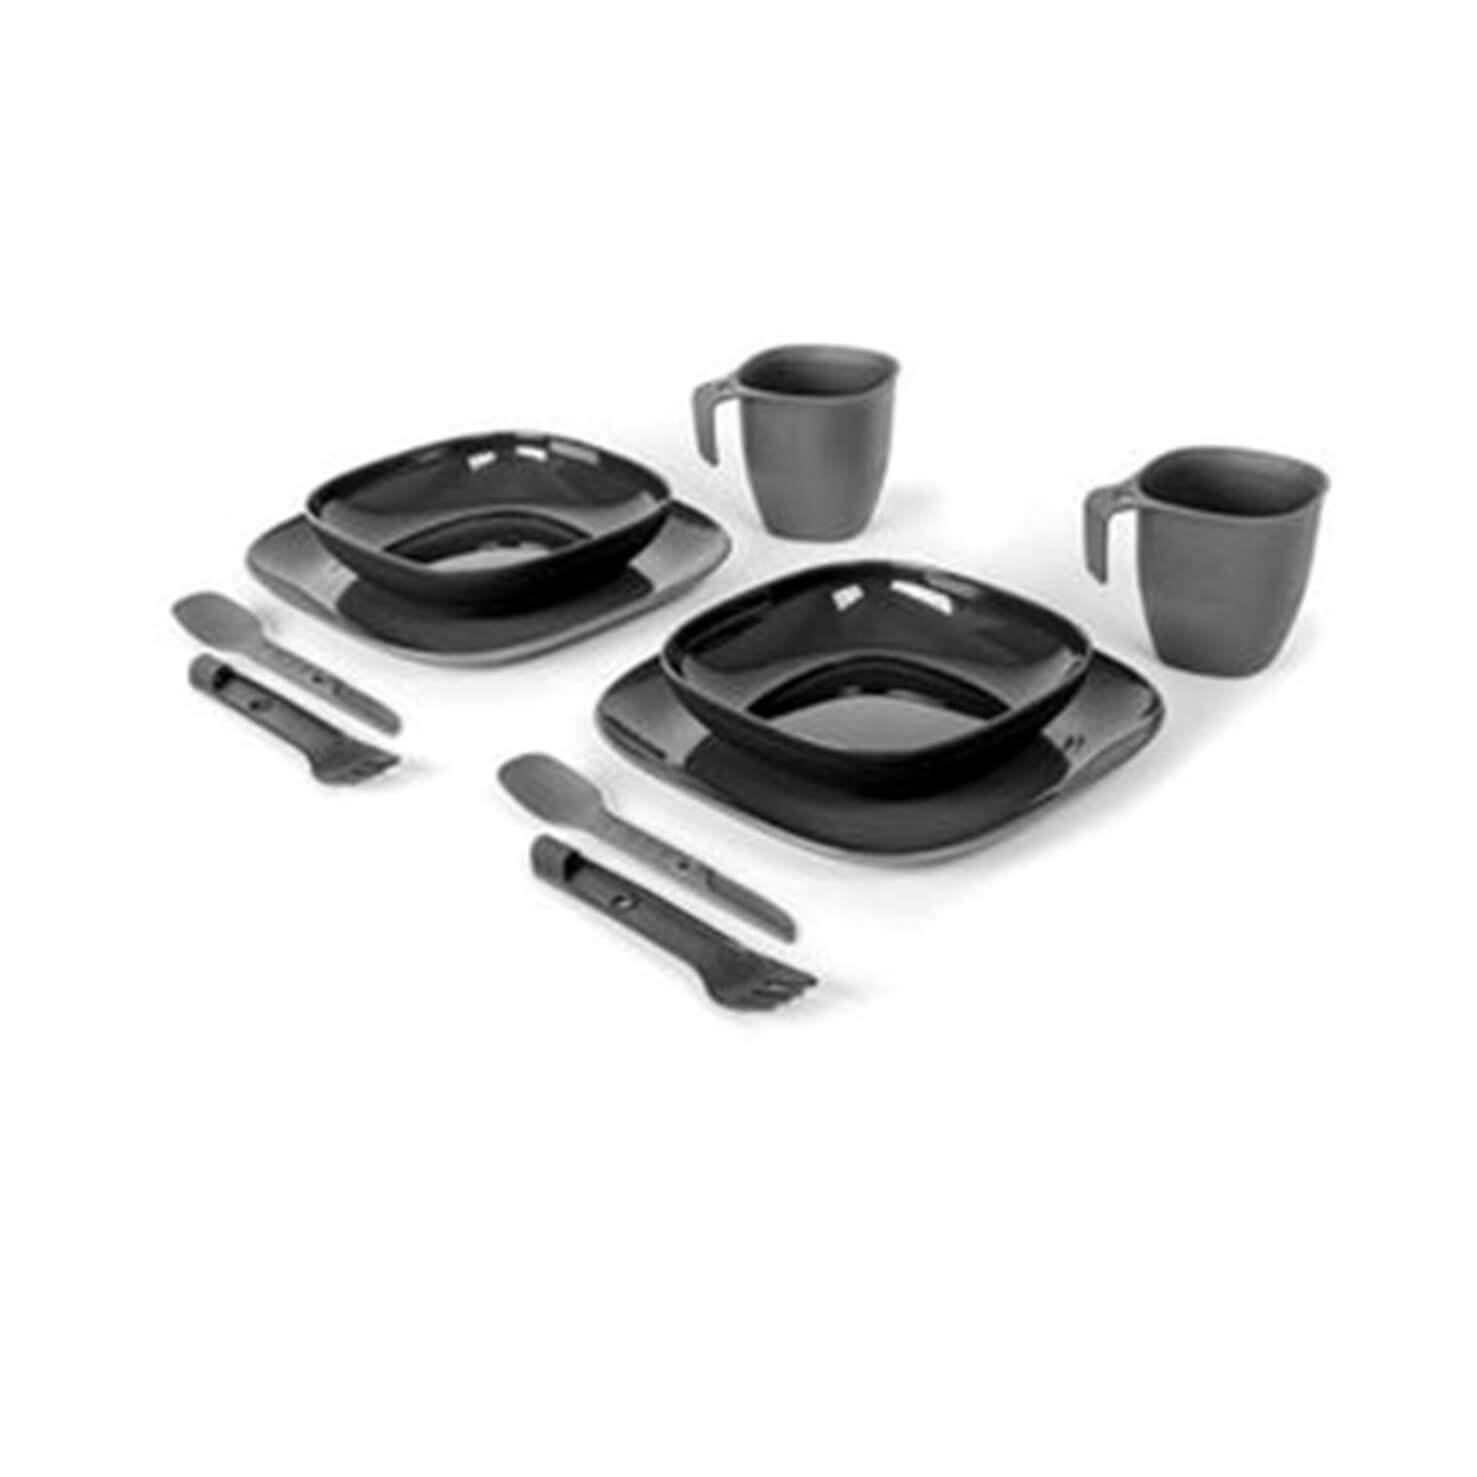 UCO Nesting Mess Kit , 2 Person